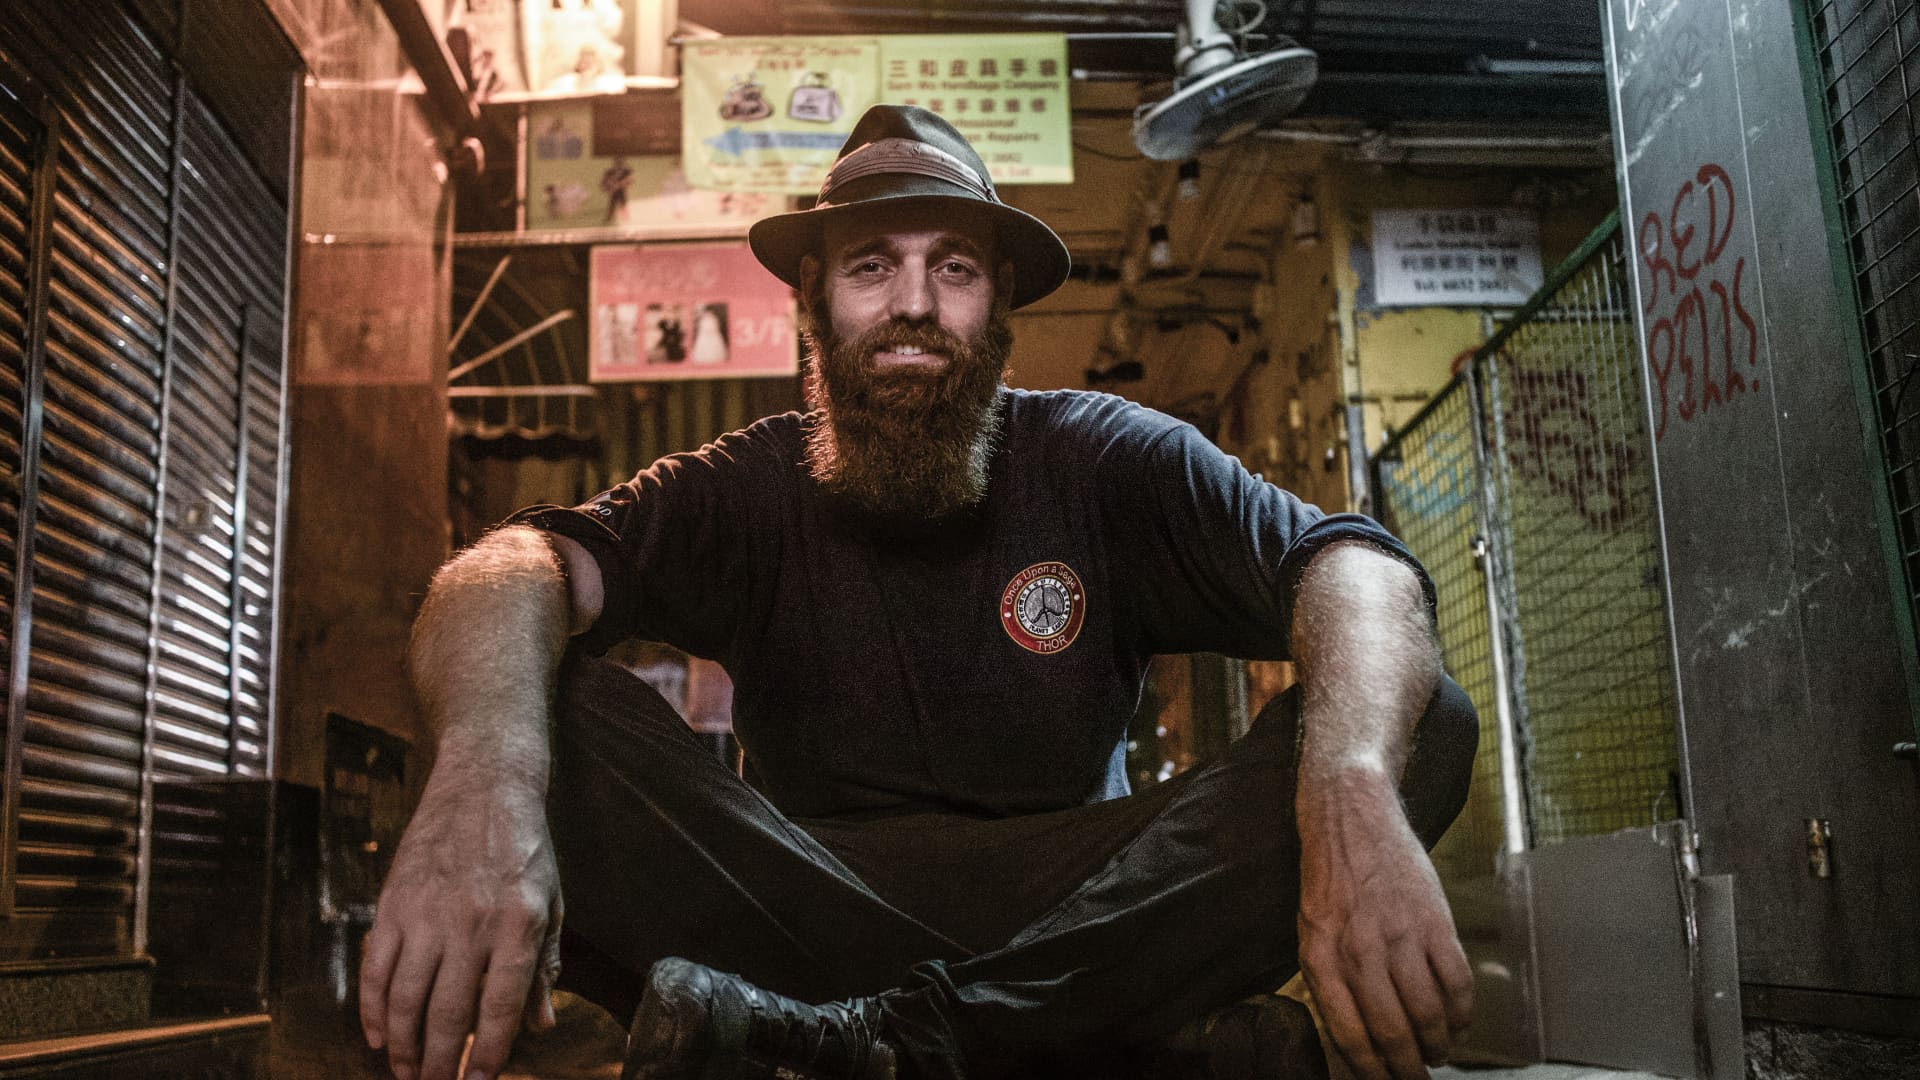 Pedersen spent the most time in Hong Kong, staying 772 days because of the Covid -19 pandemic.